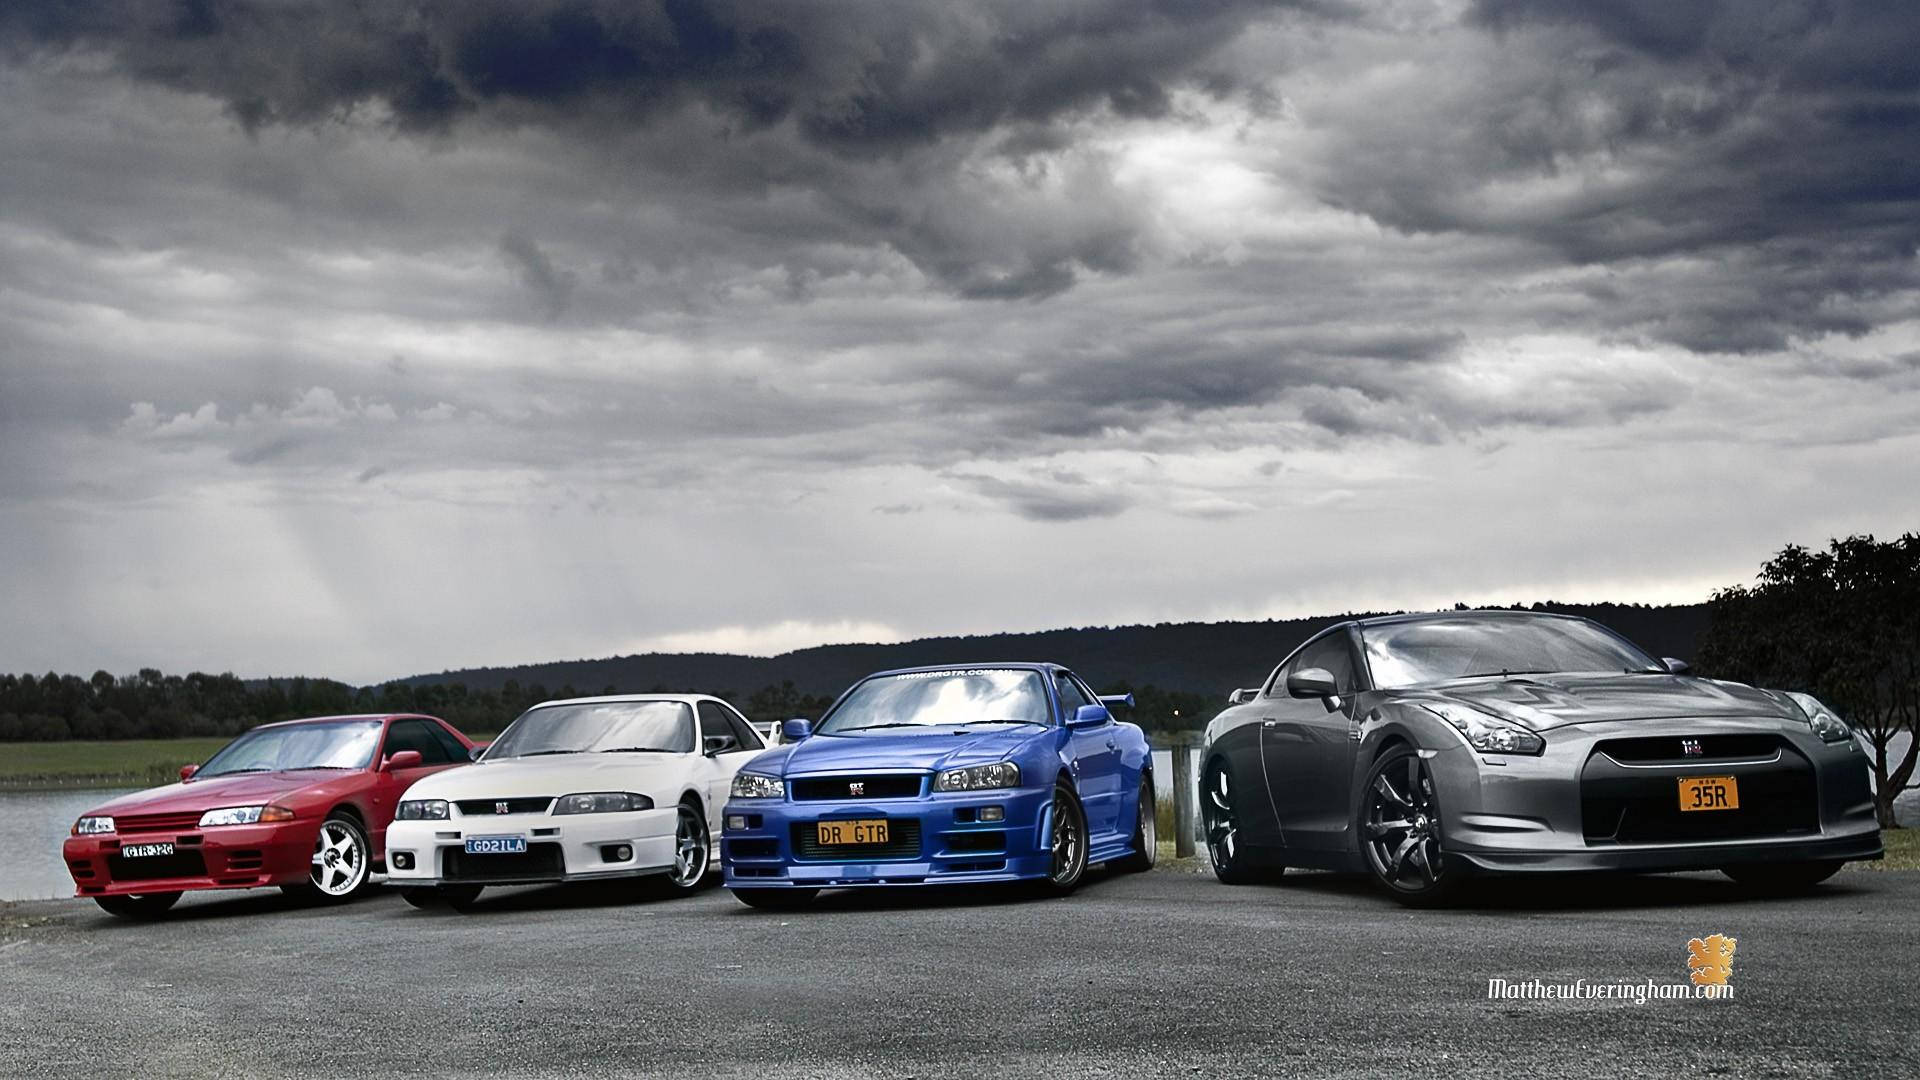 Jdm Cars Under Cloudy Sky Background